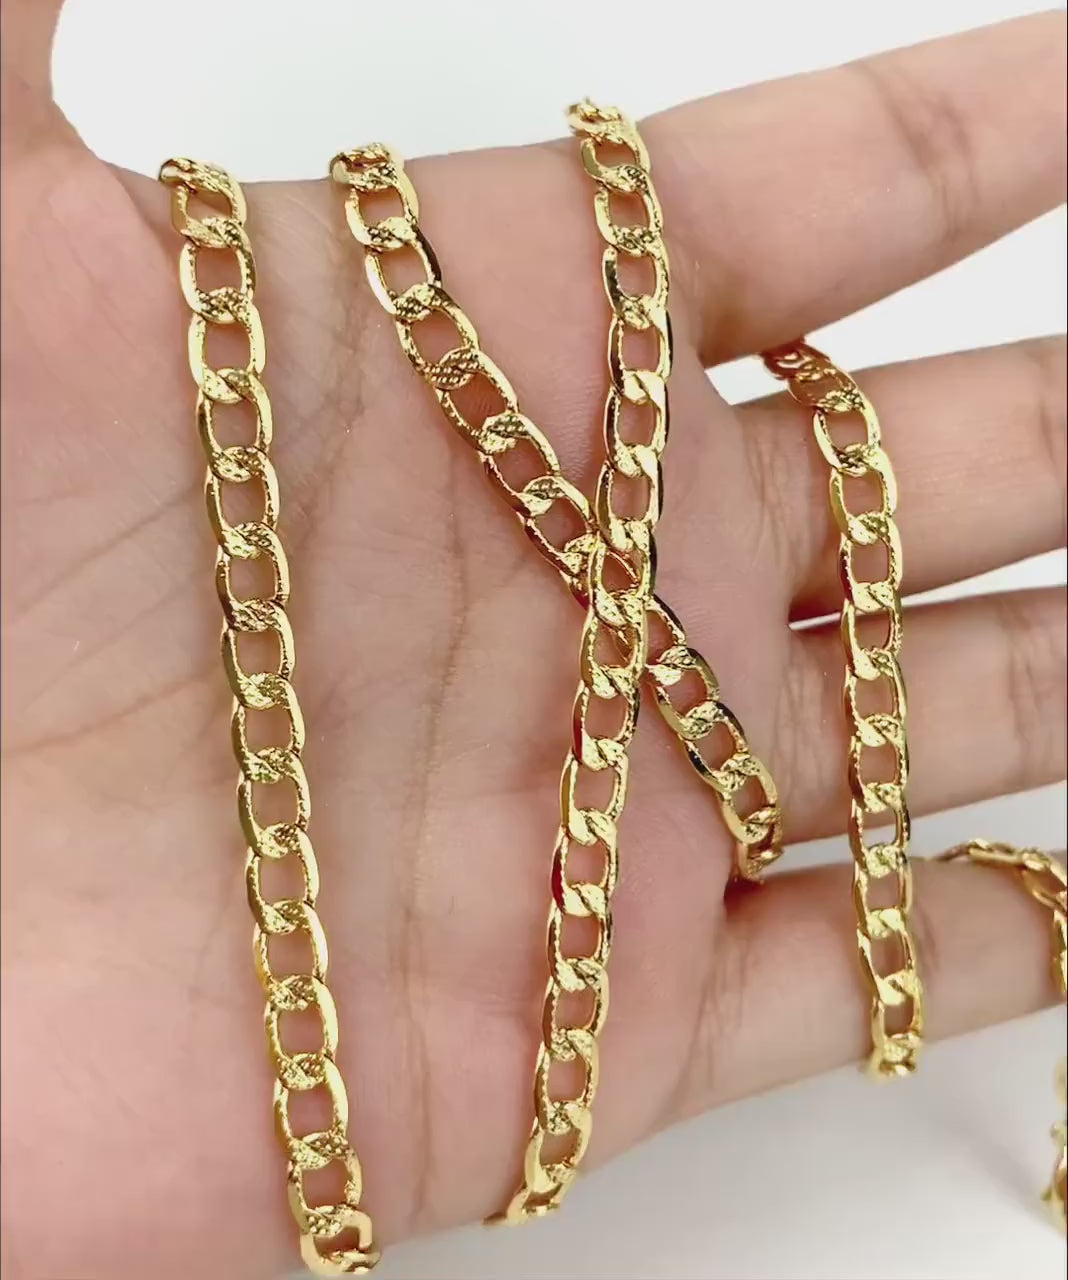 18k Gold Filled 4.5mm Open Cuban Link Chain, Curb Link Necklace, Wholesale Jewelry Making Supplies